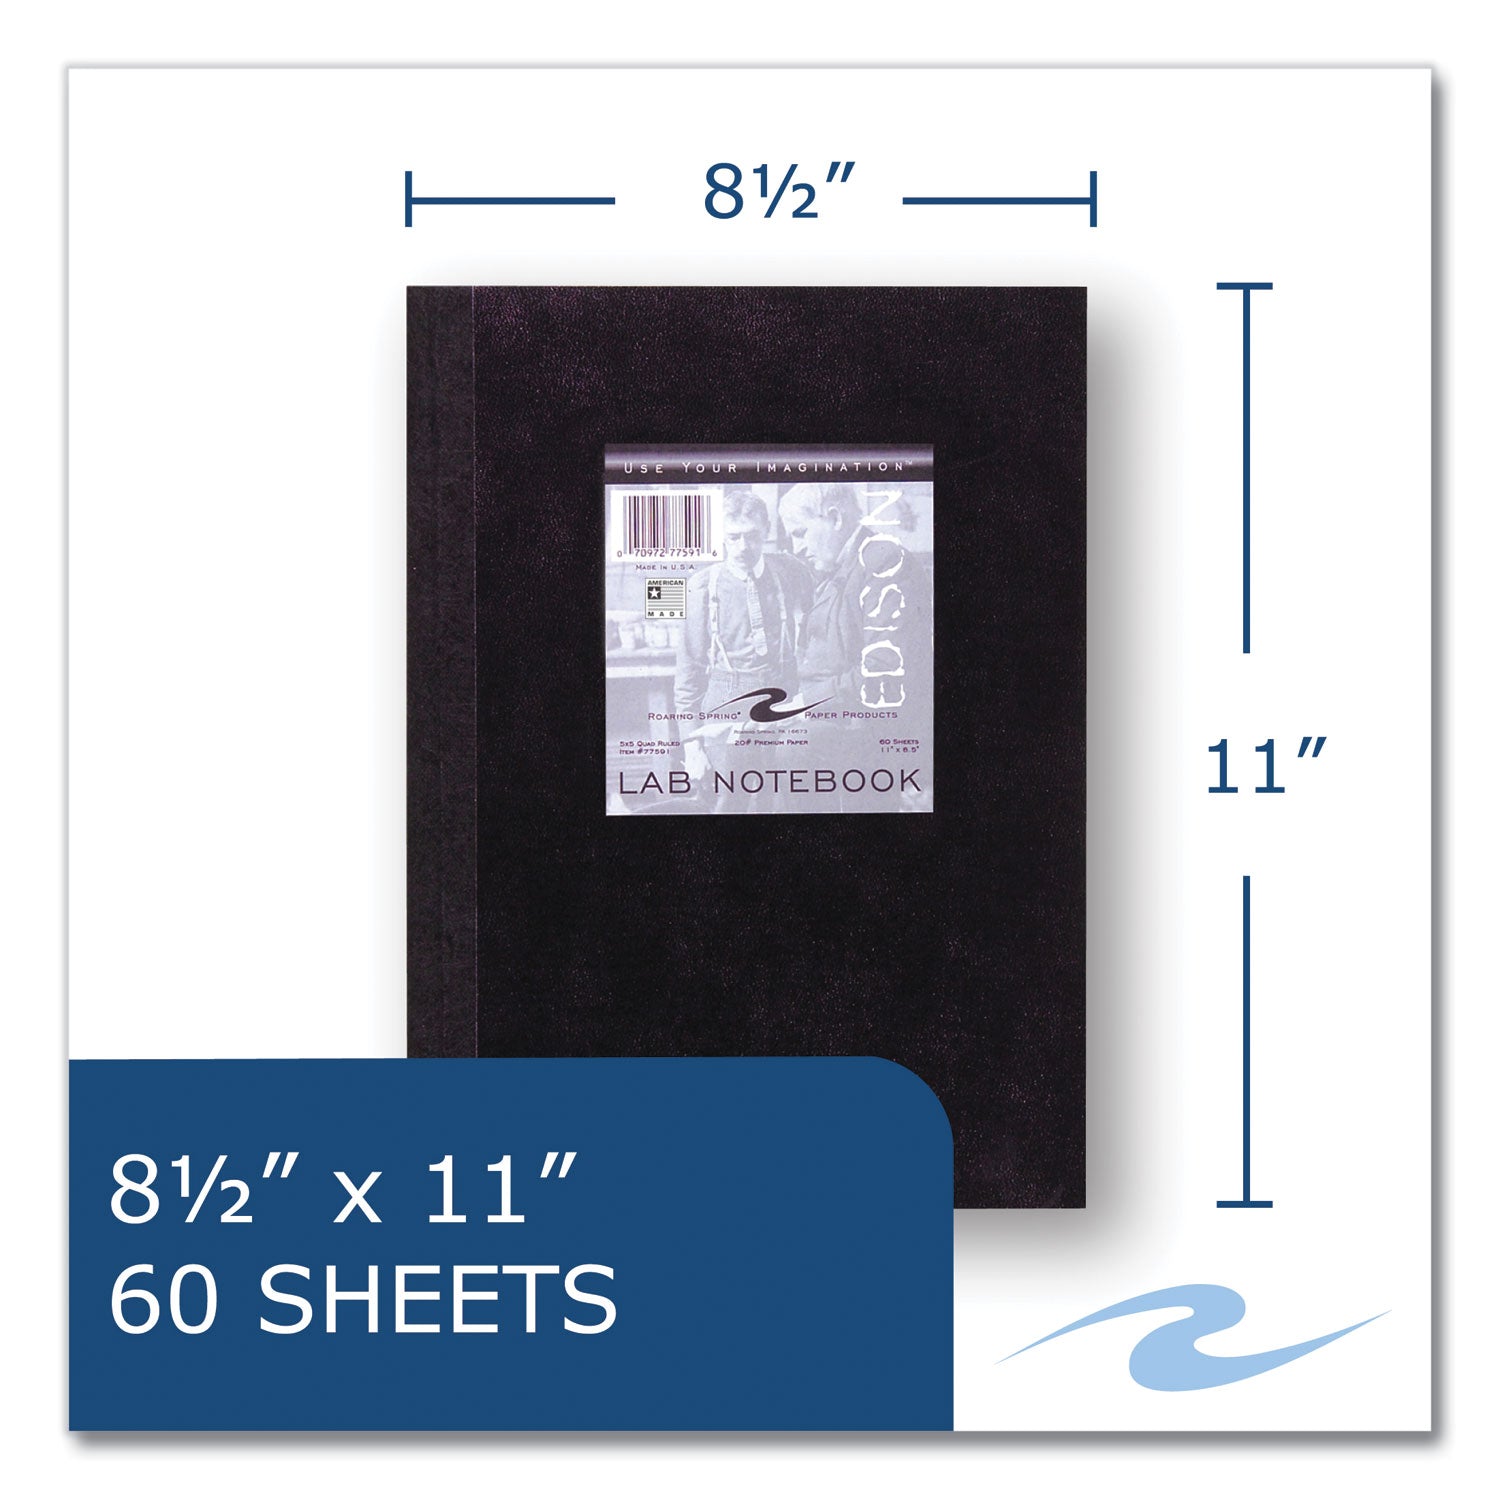 lab-and-science-black-notebook-quad-rule-5-sq-in-black-cover-60-11-x-85-sheets-24-carton-ships-in-4-6-business-days_roa77591cs - 3